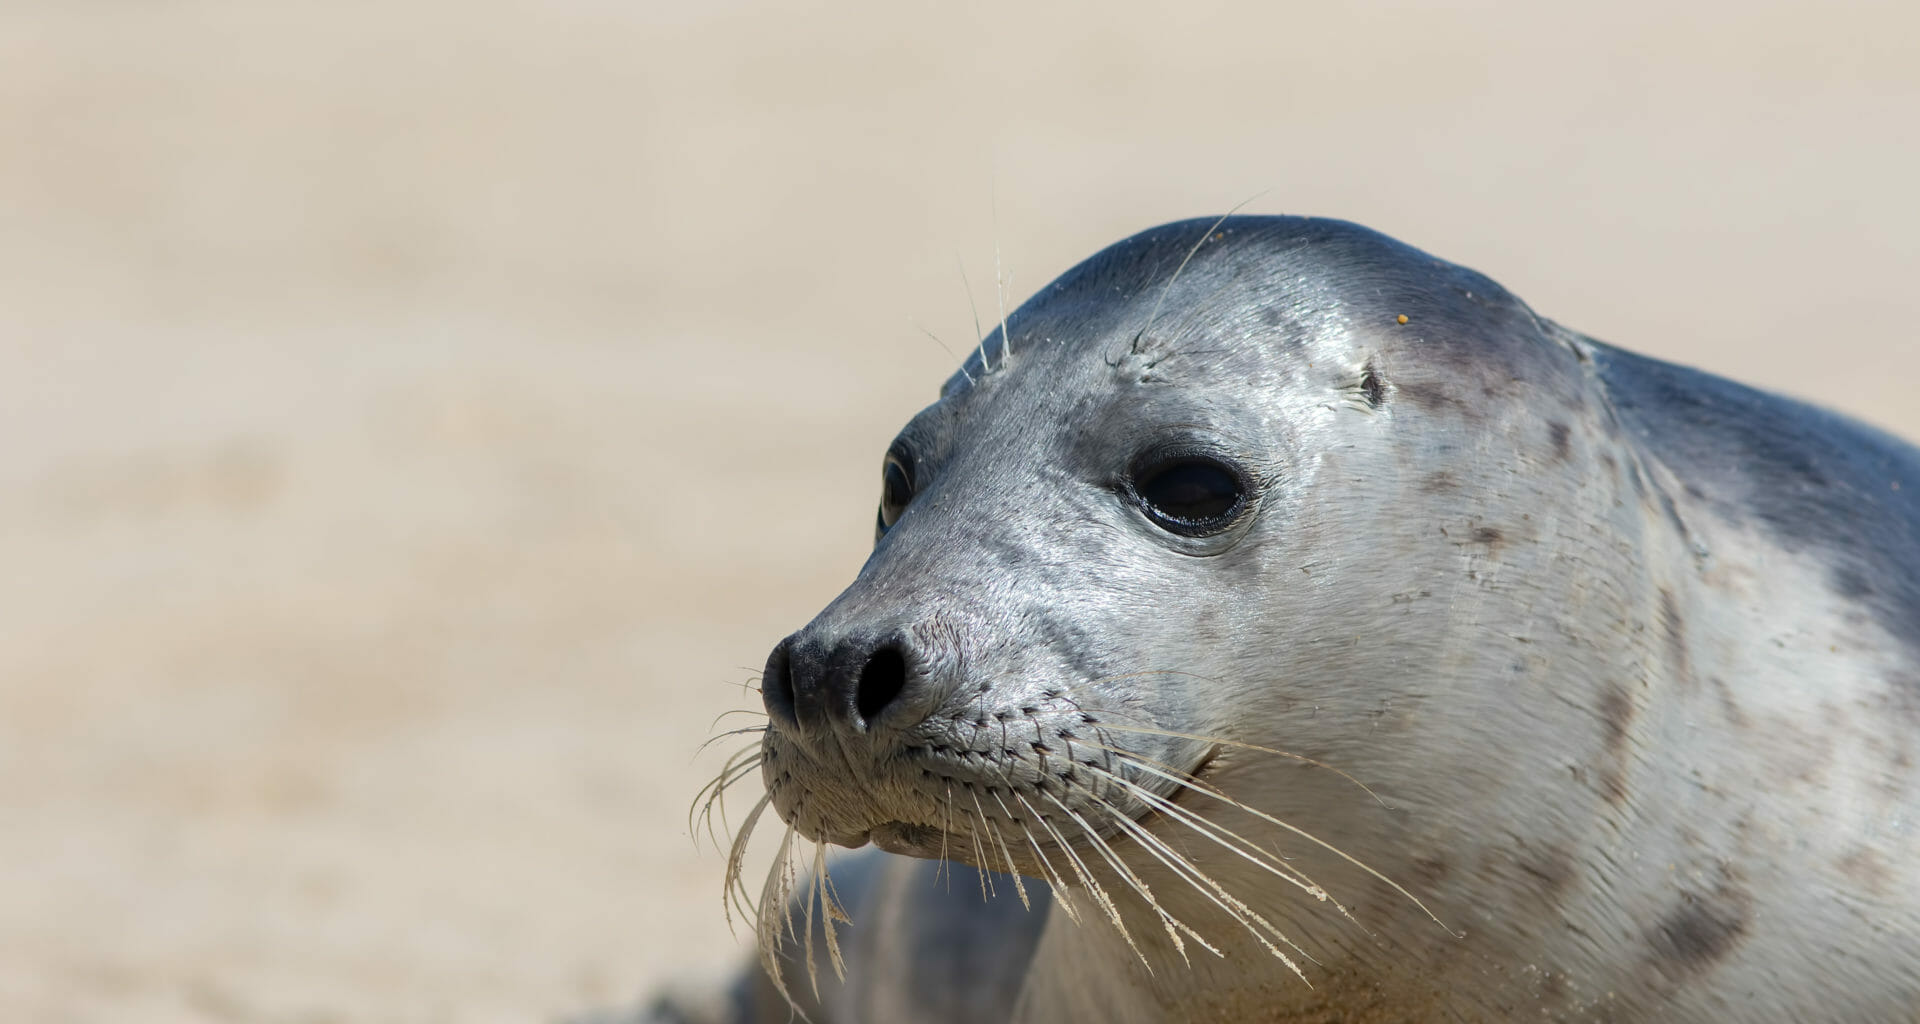 £10,000 reward for information on illegal seal killing after police asked to investigate deaths 7